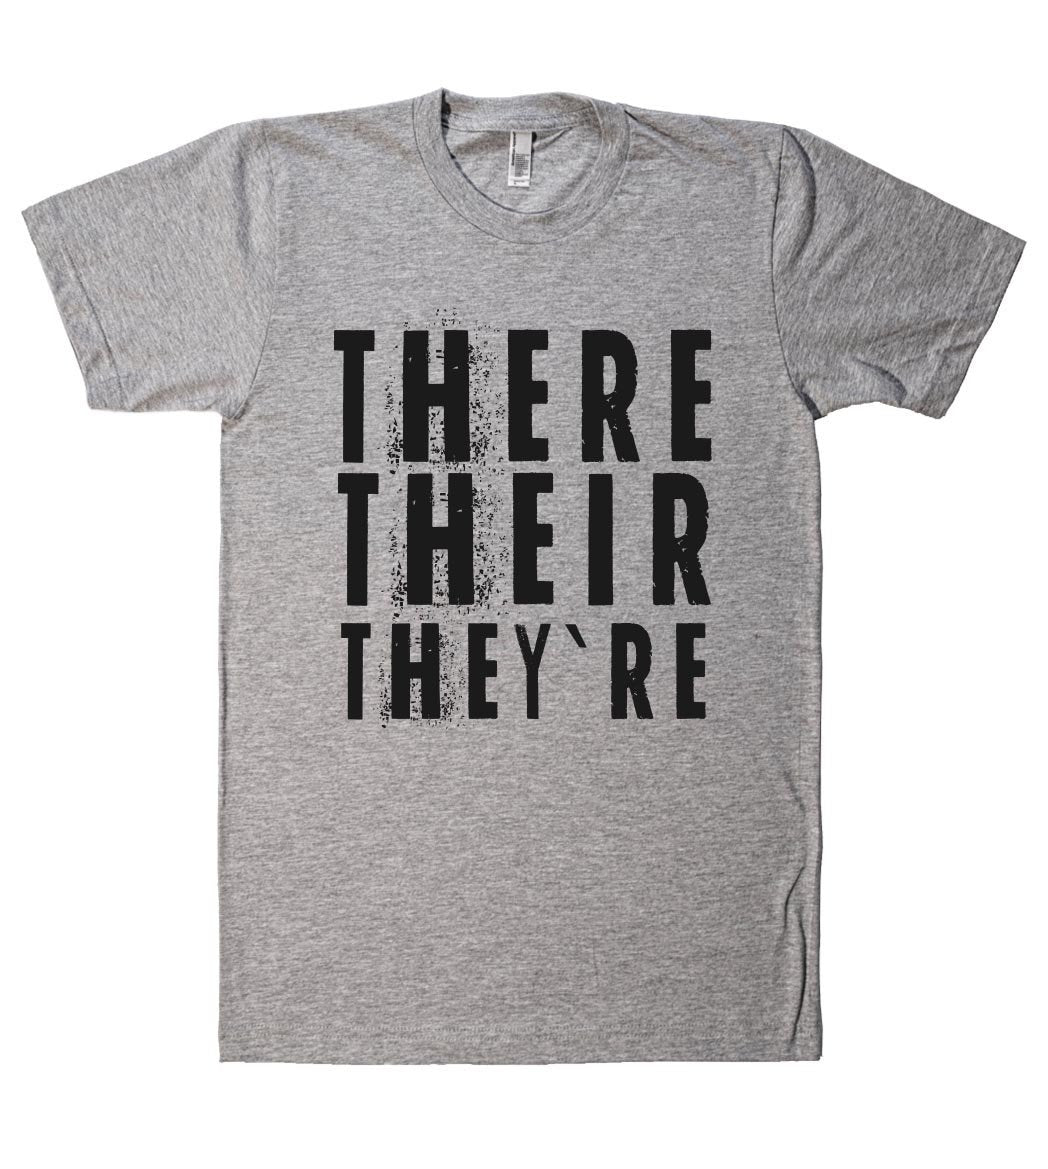 THERE THEIR THEY RE T-SHIRT - Shirtoopia